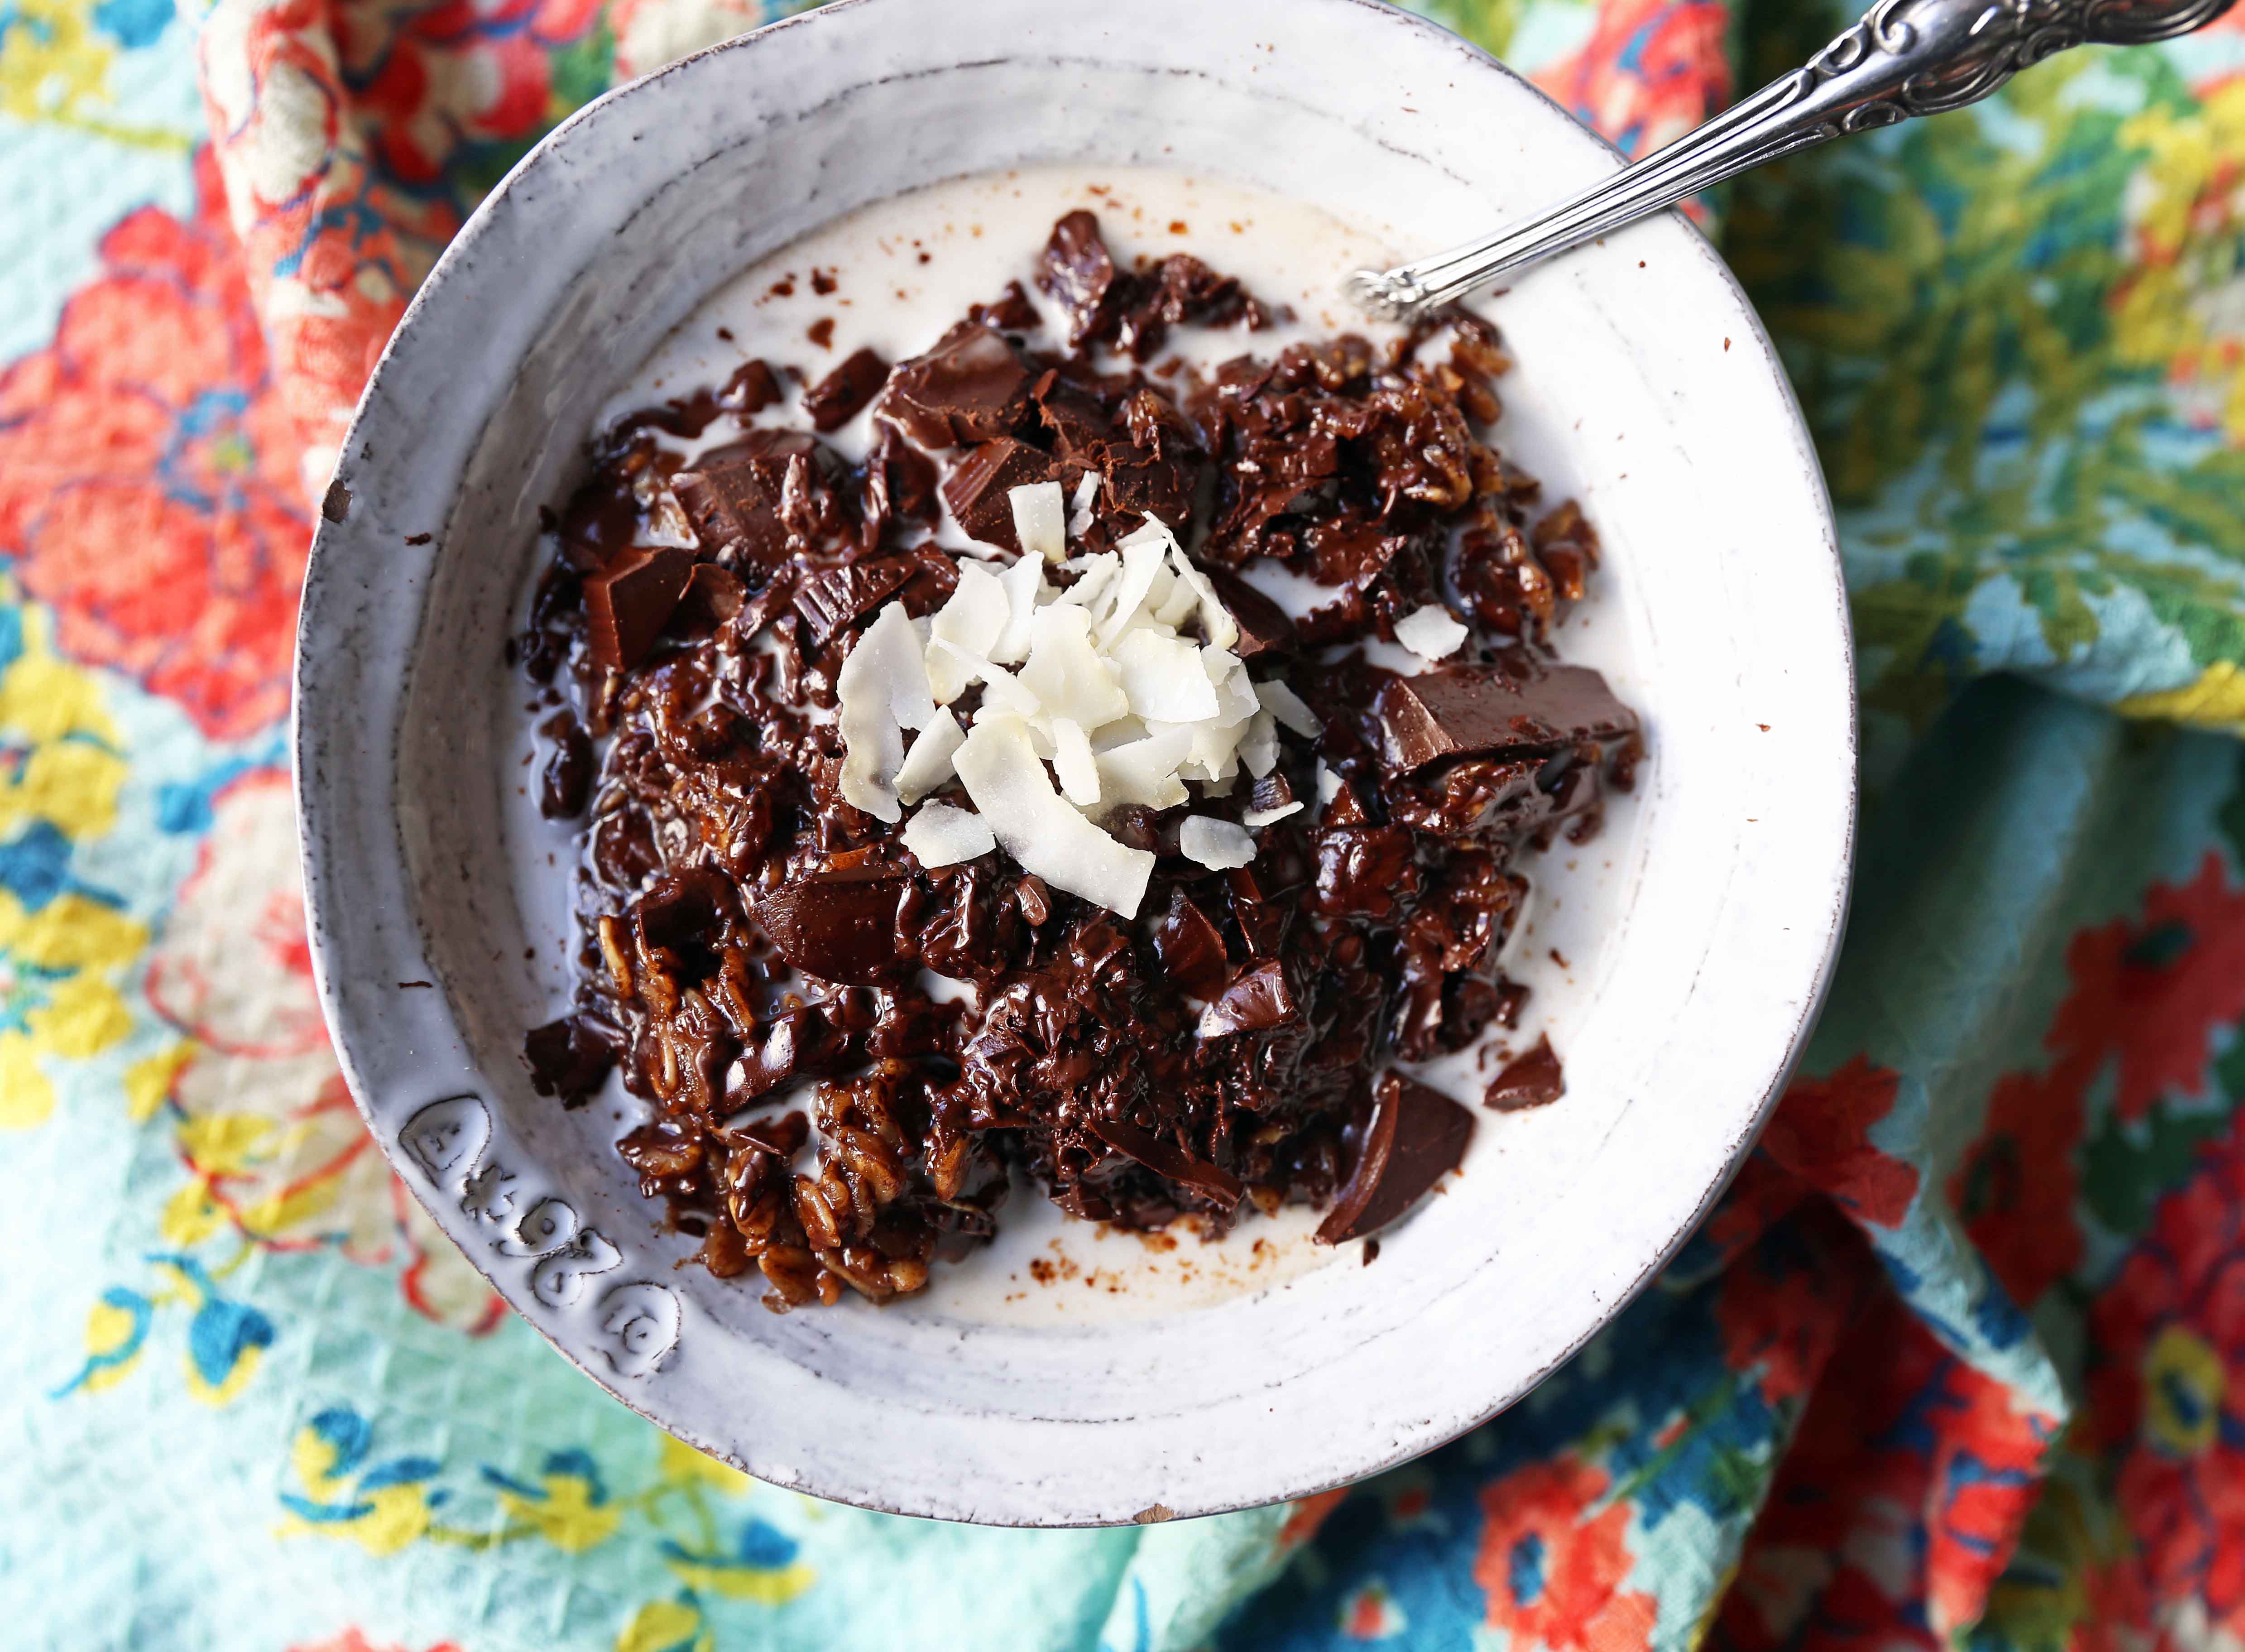 Decadent double chocolate oatmeal with coconut flakes is made with rolled oats mixed with creamy coconut milk, cocoa, lightly sweetened, and topped with chocolate chunks. These creamy chocolate oats are a rich, heavenly breakfast!